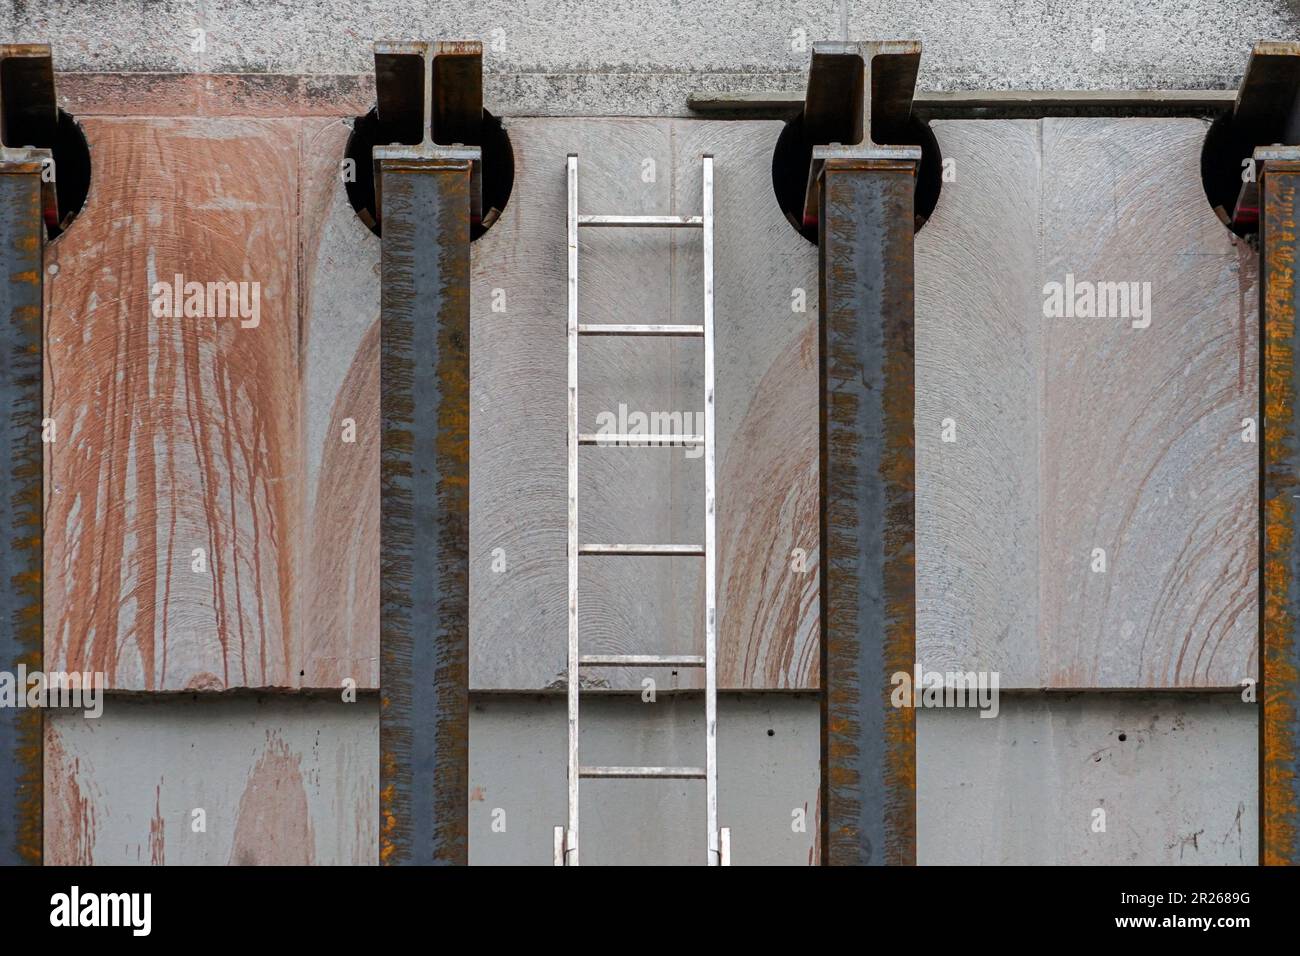 Between two rusty metal columns, an aluminum ladder is leaning against a house wall. Stock Photo